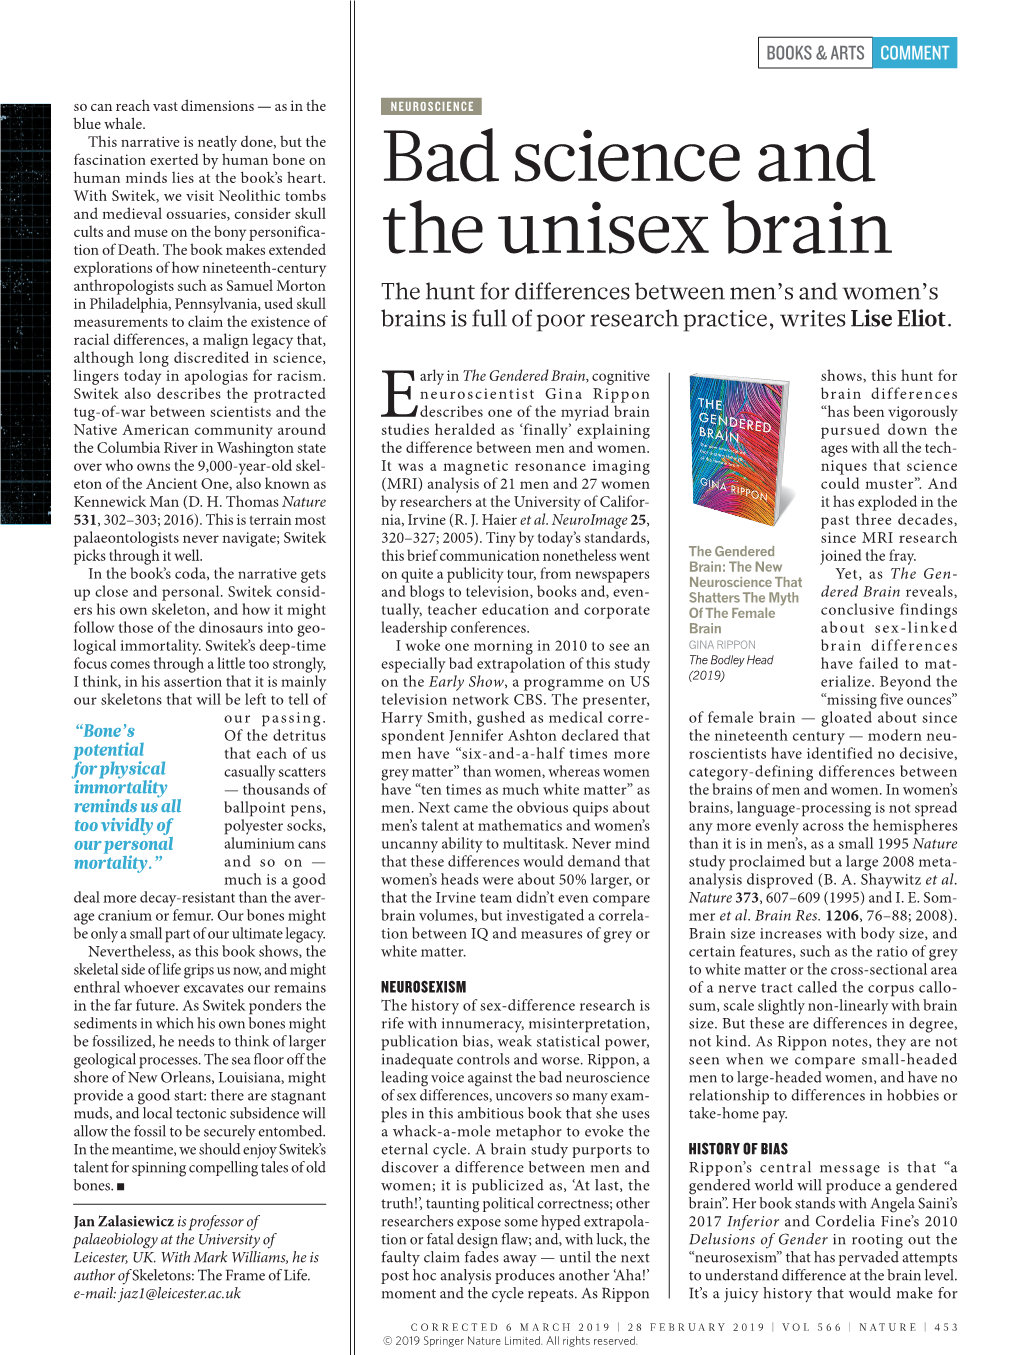 Bad Science and the Unisex Brain